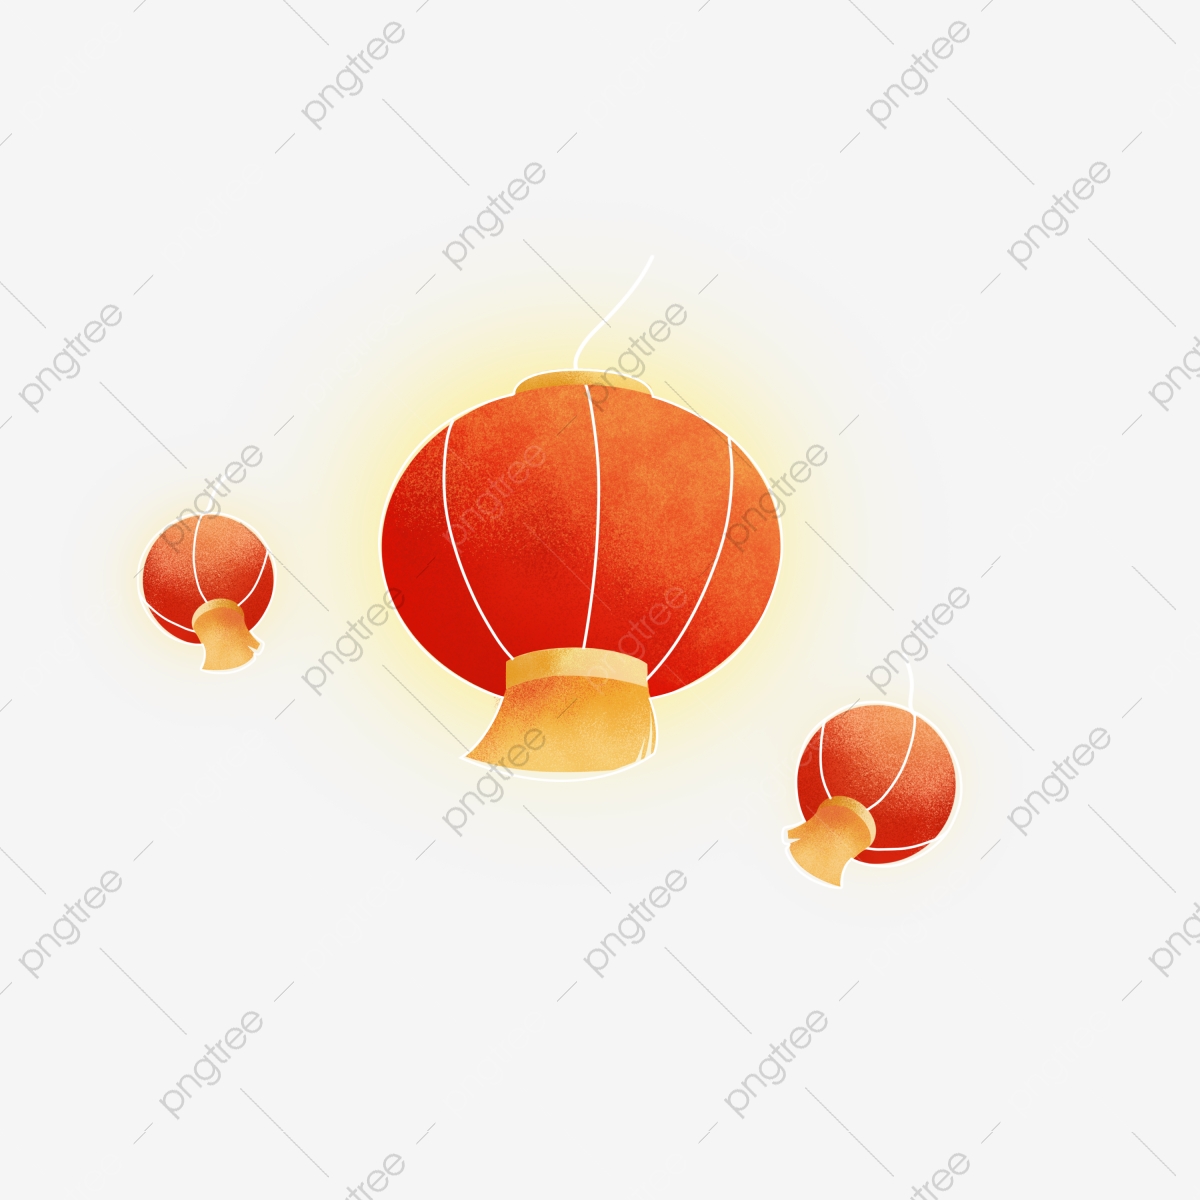 lantern clipart traditional